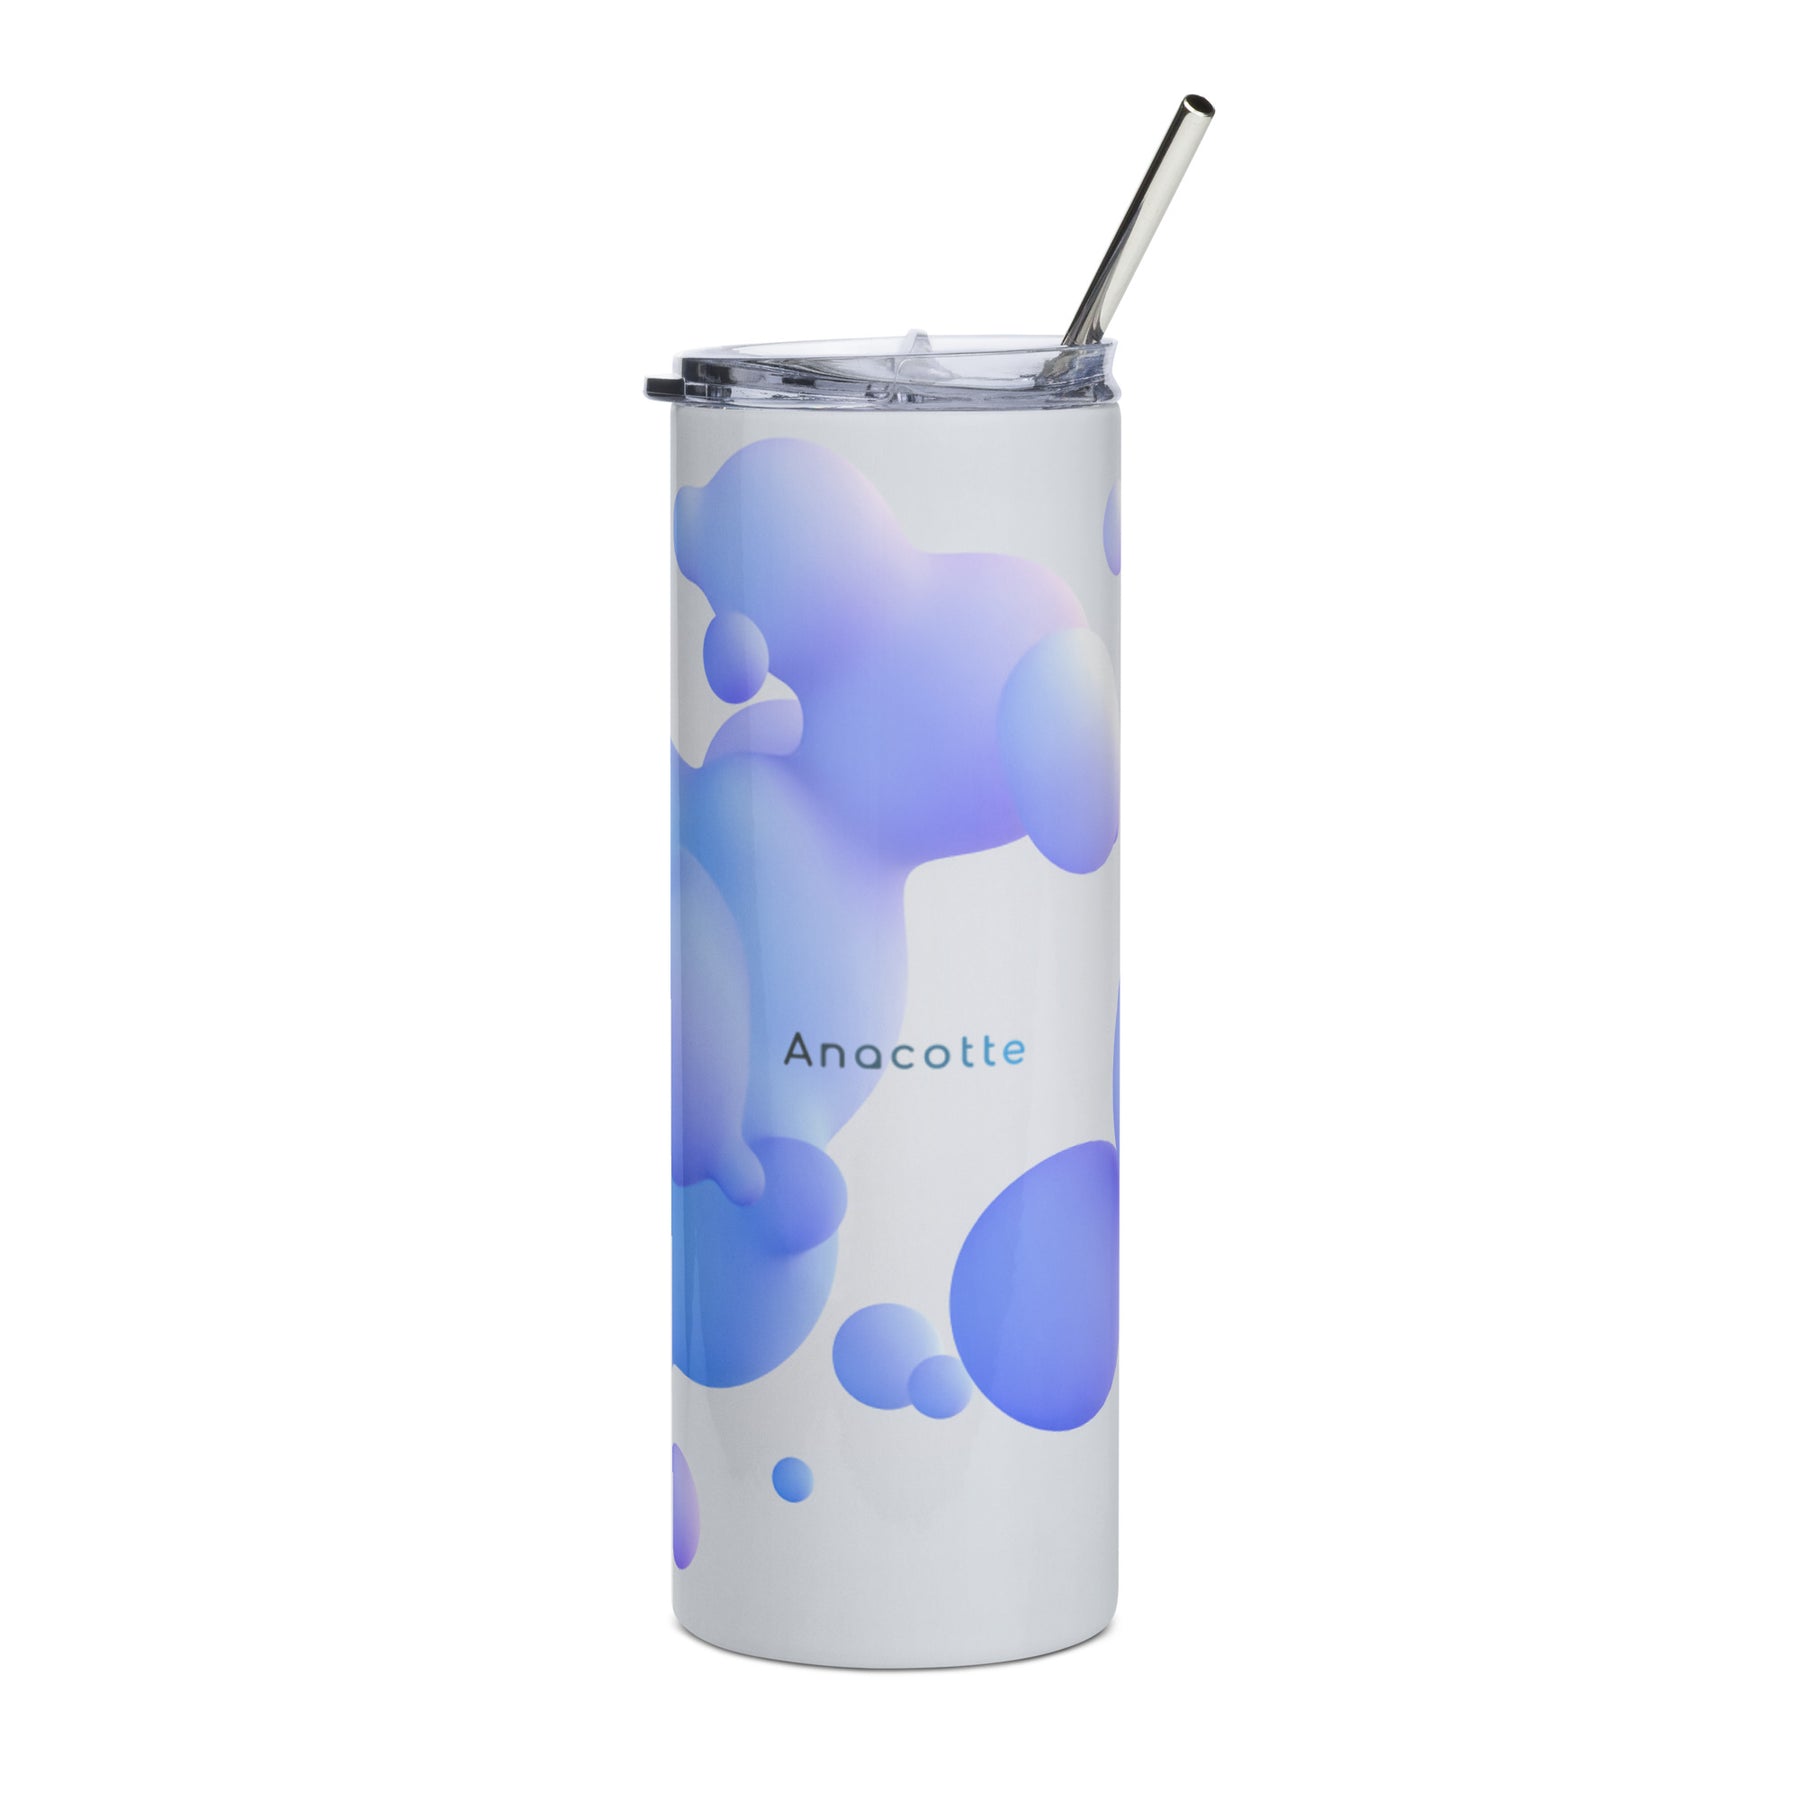 Anacotte Tumbler, Insulated Waterbottle, and Drinkware